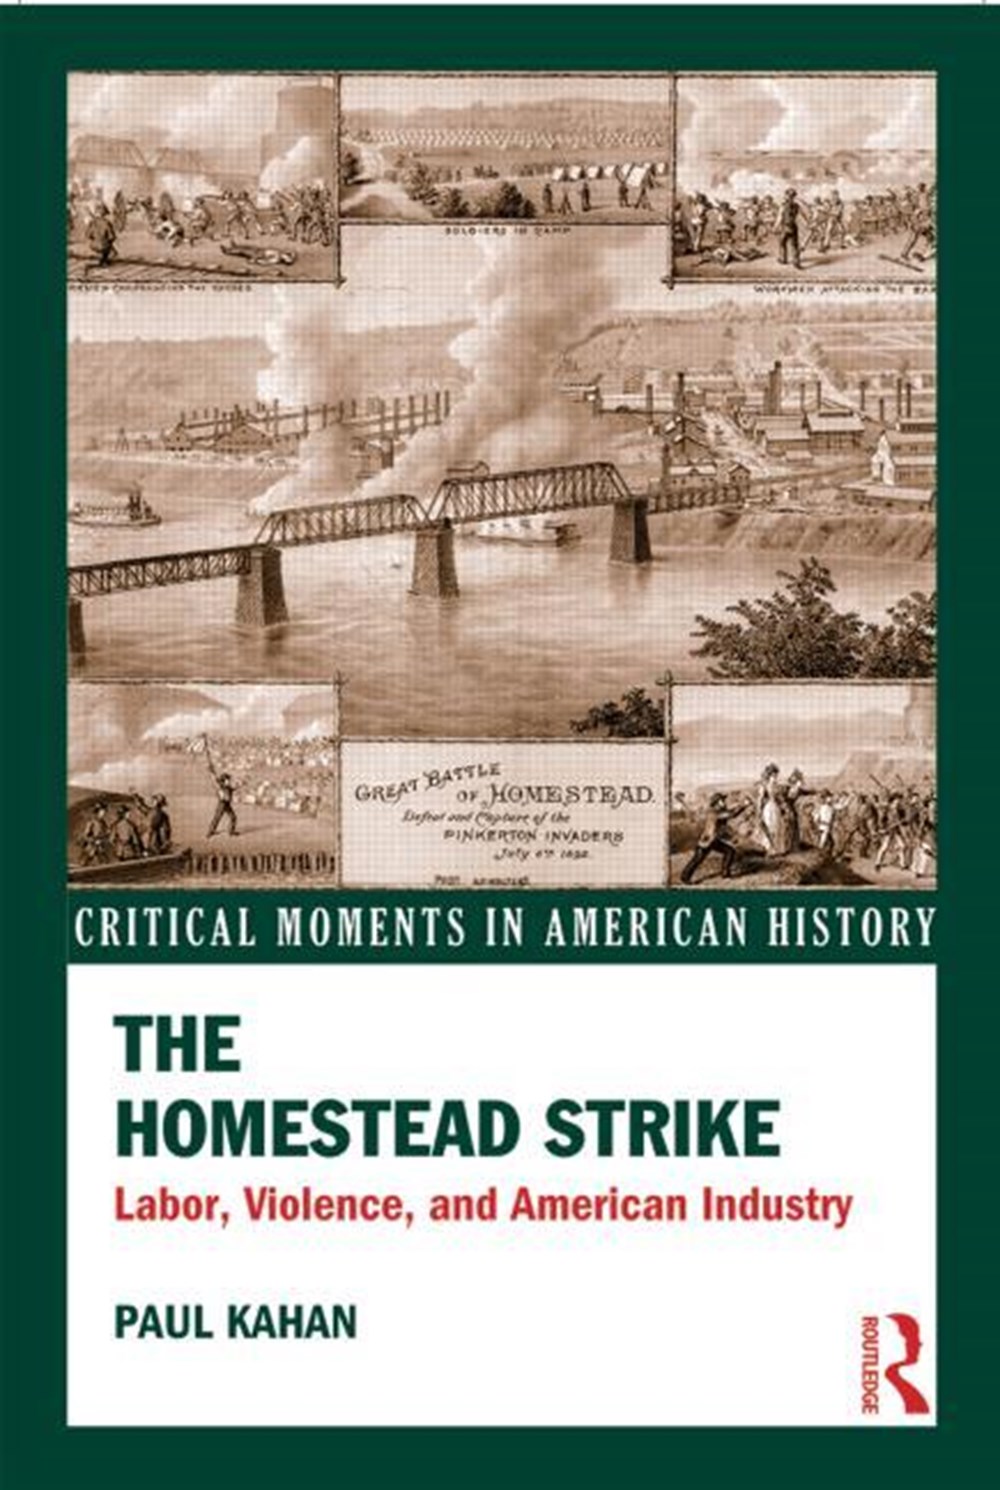 Homestead Strike: Labor, Violence, and American Industry